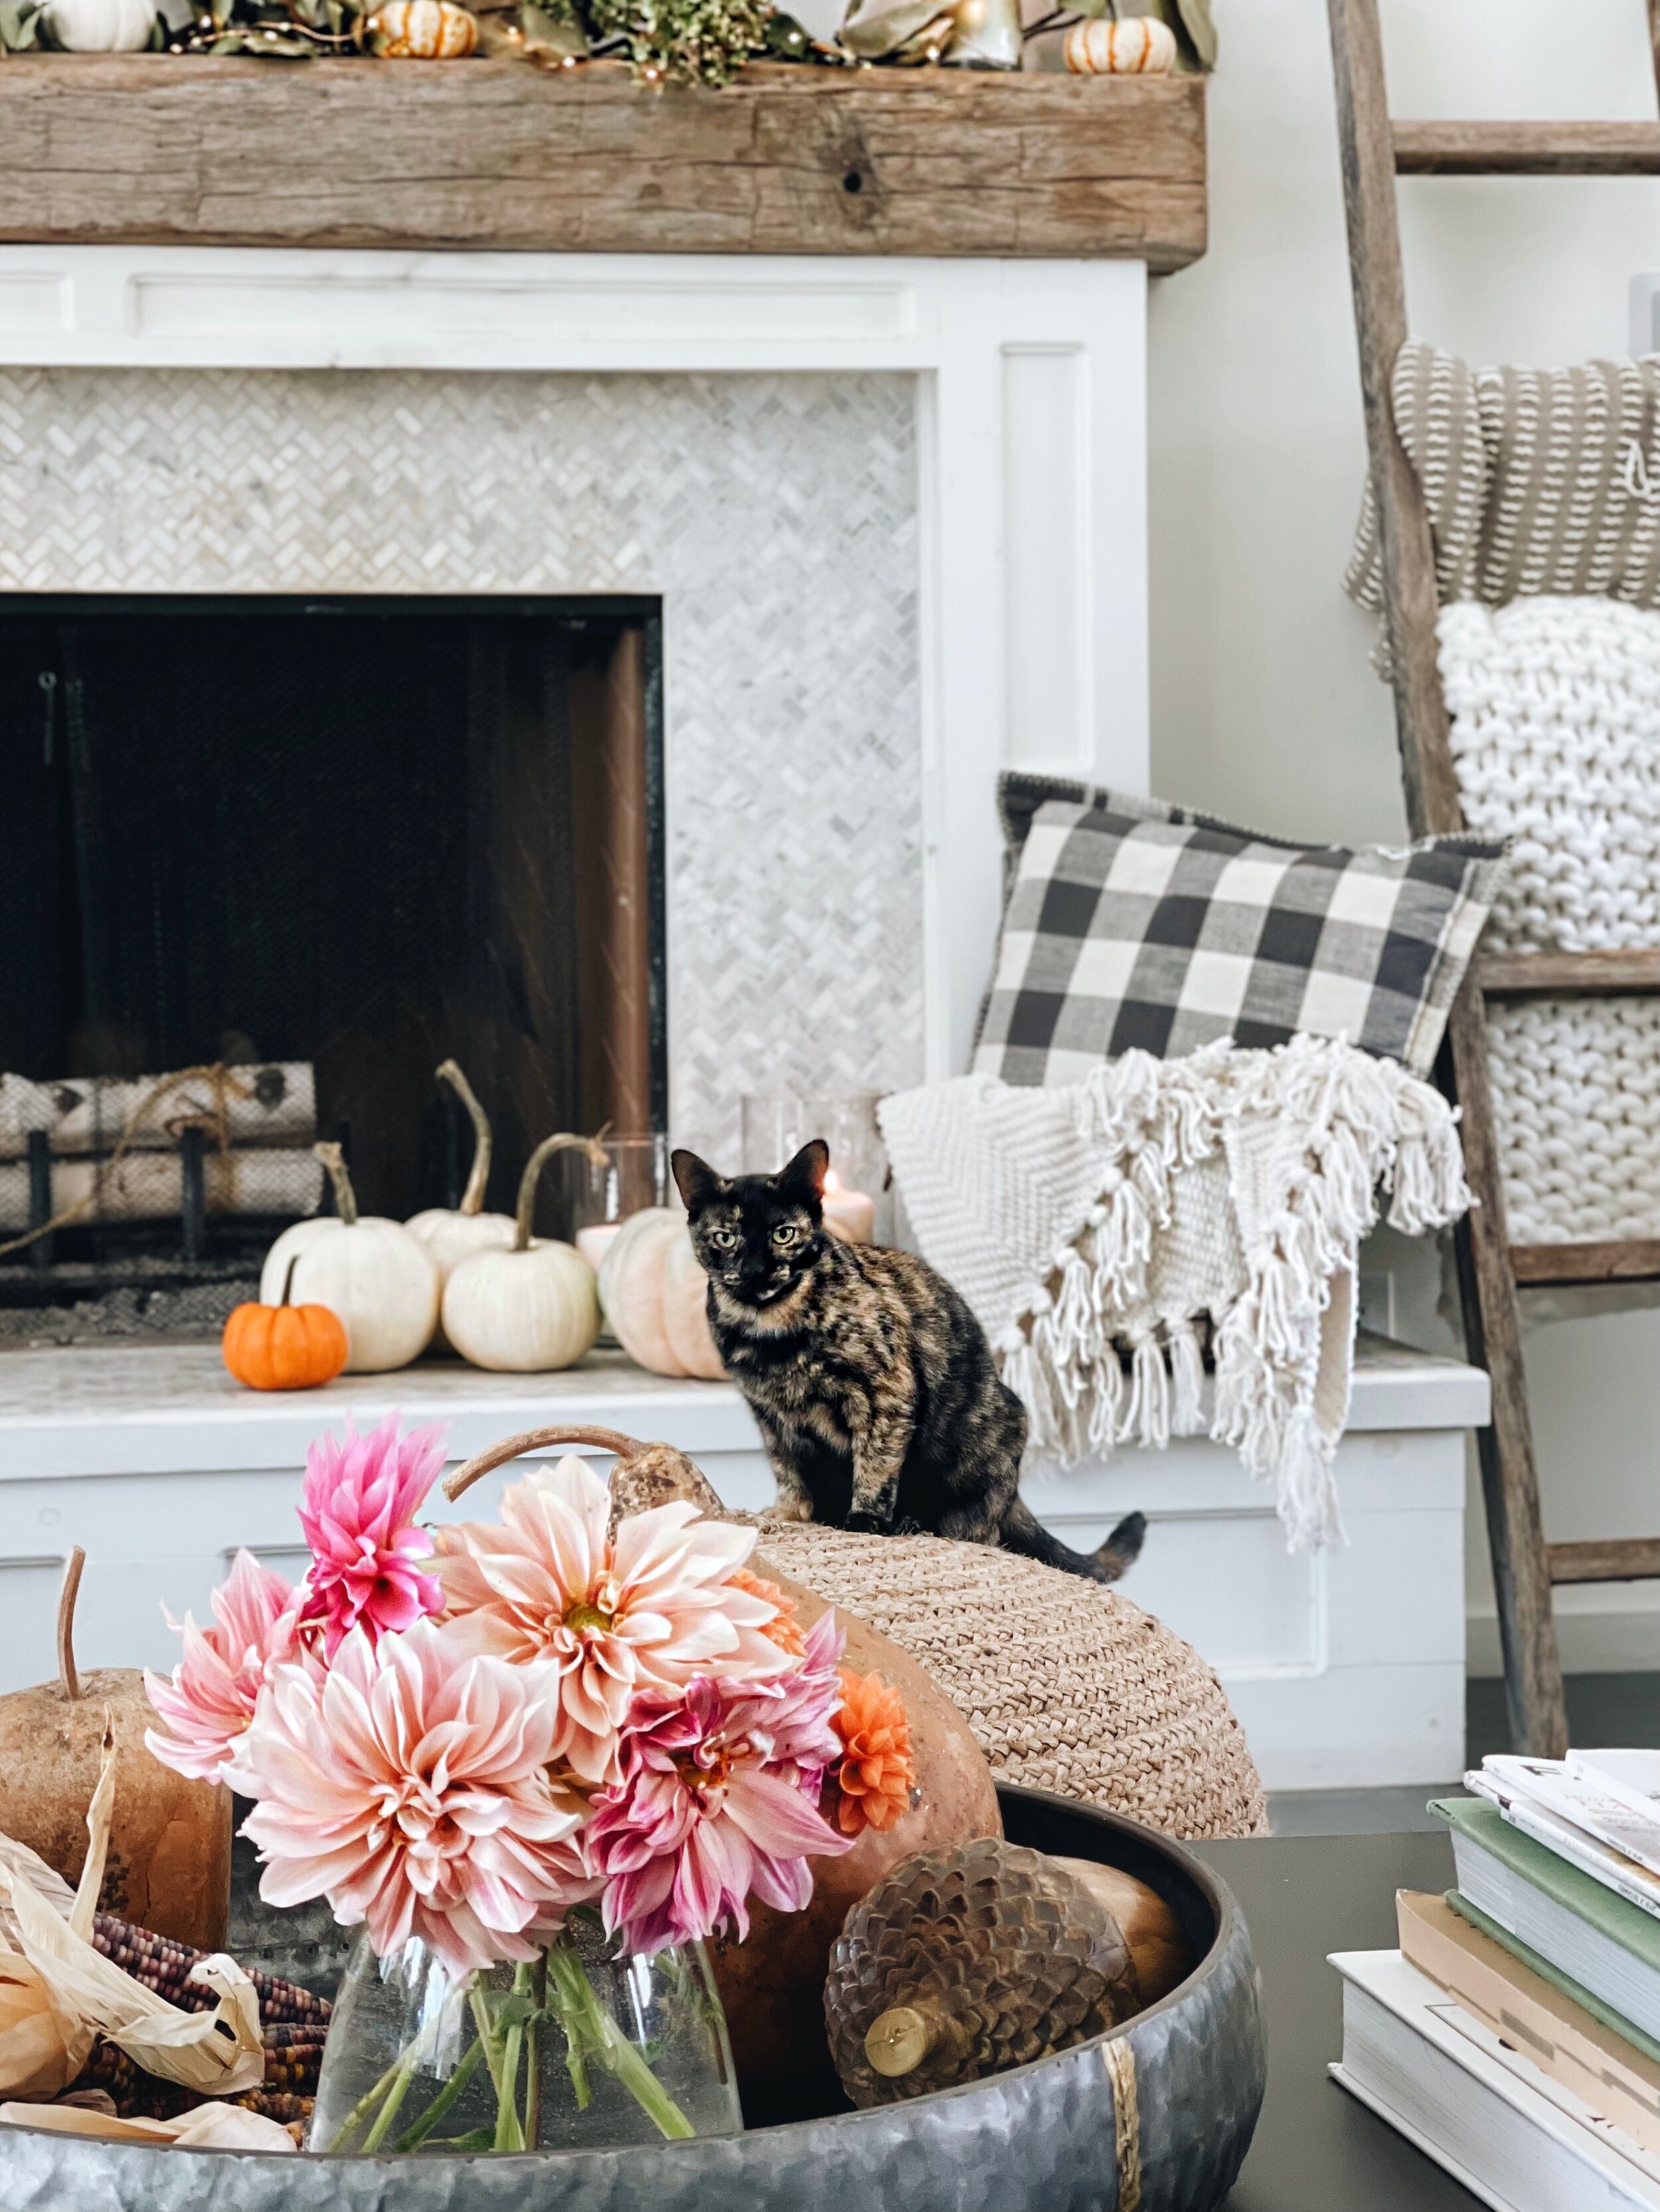 Vintage Fall Decor Ideas to Add Charm and Character to Your Home